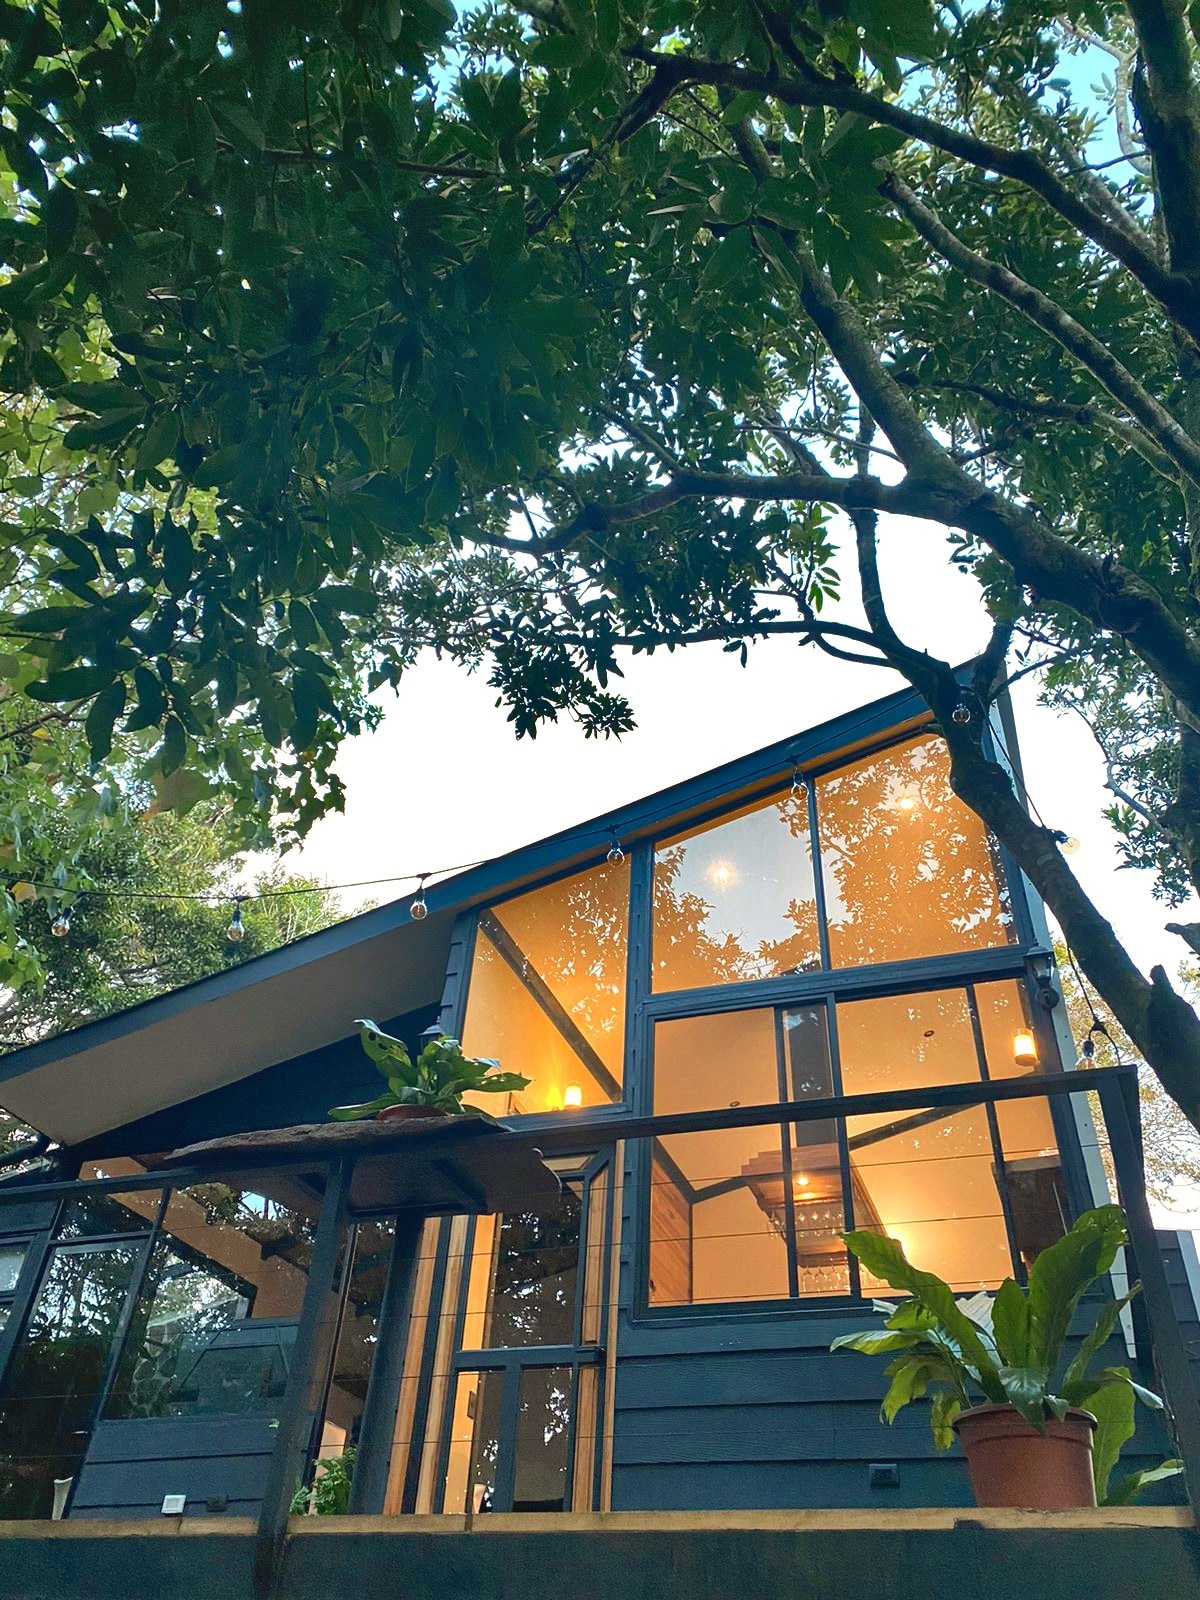 My Amazing Black House: In the cloud forest